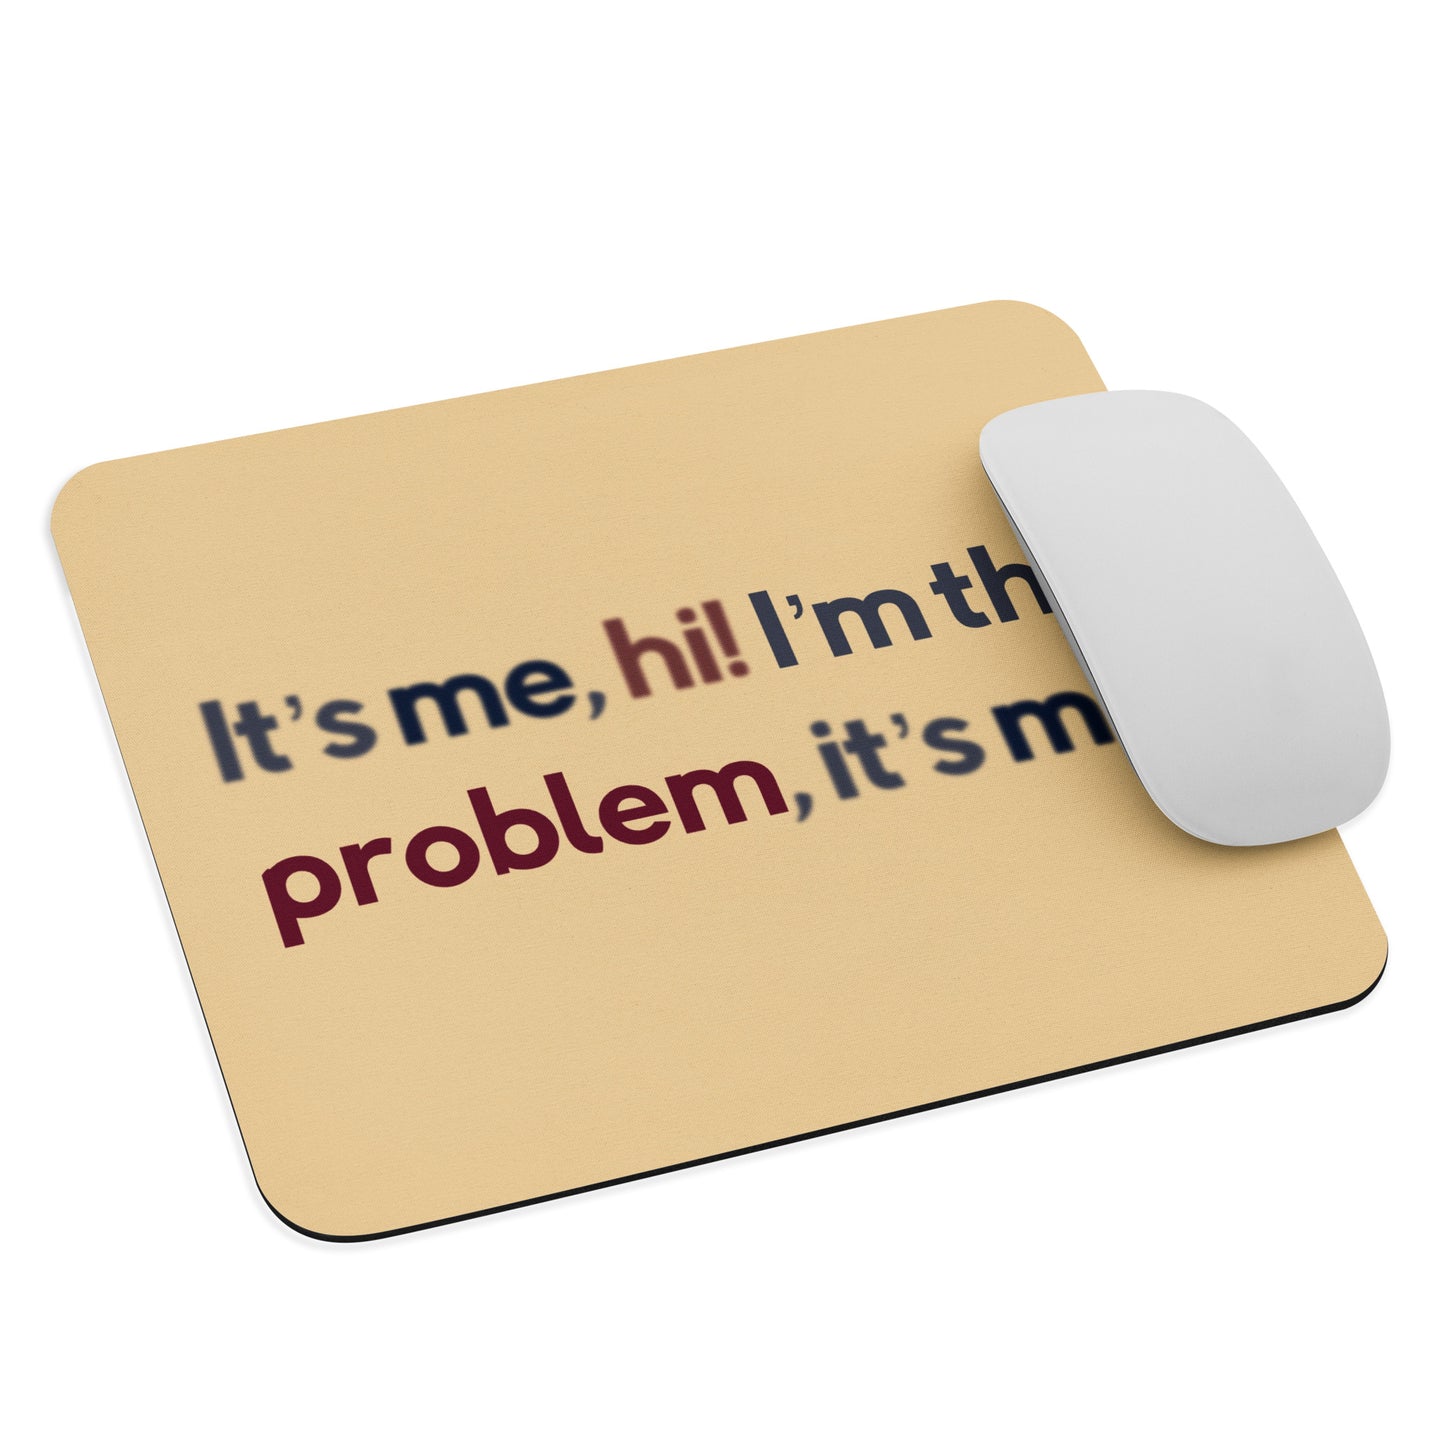 A beige mouse pad with the quote It's me, hi! I'm the problem, it's me. A mouse sits on the mouse pad.